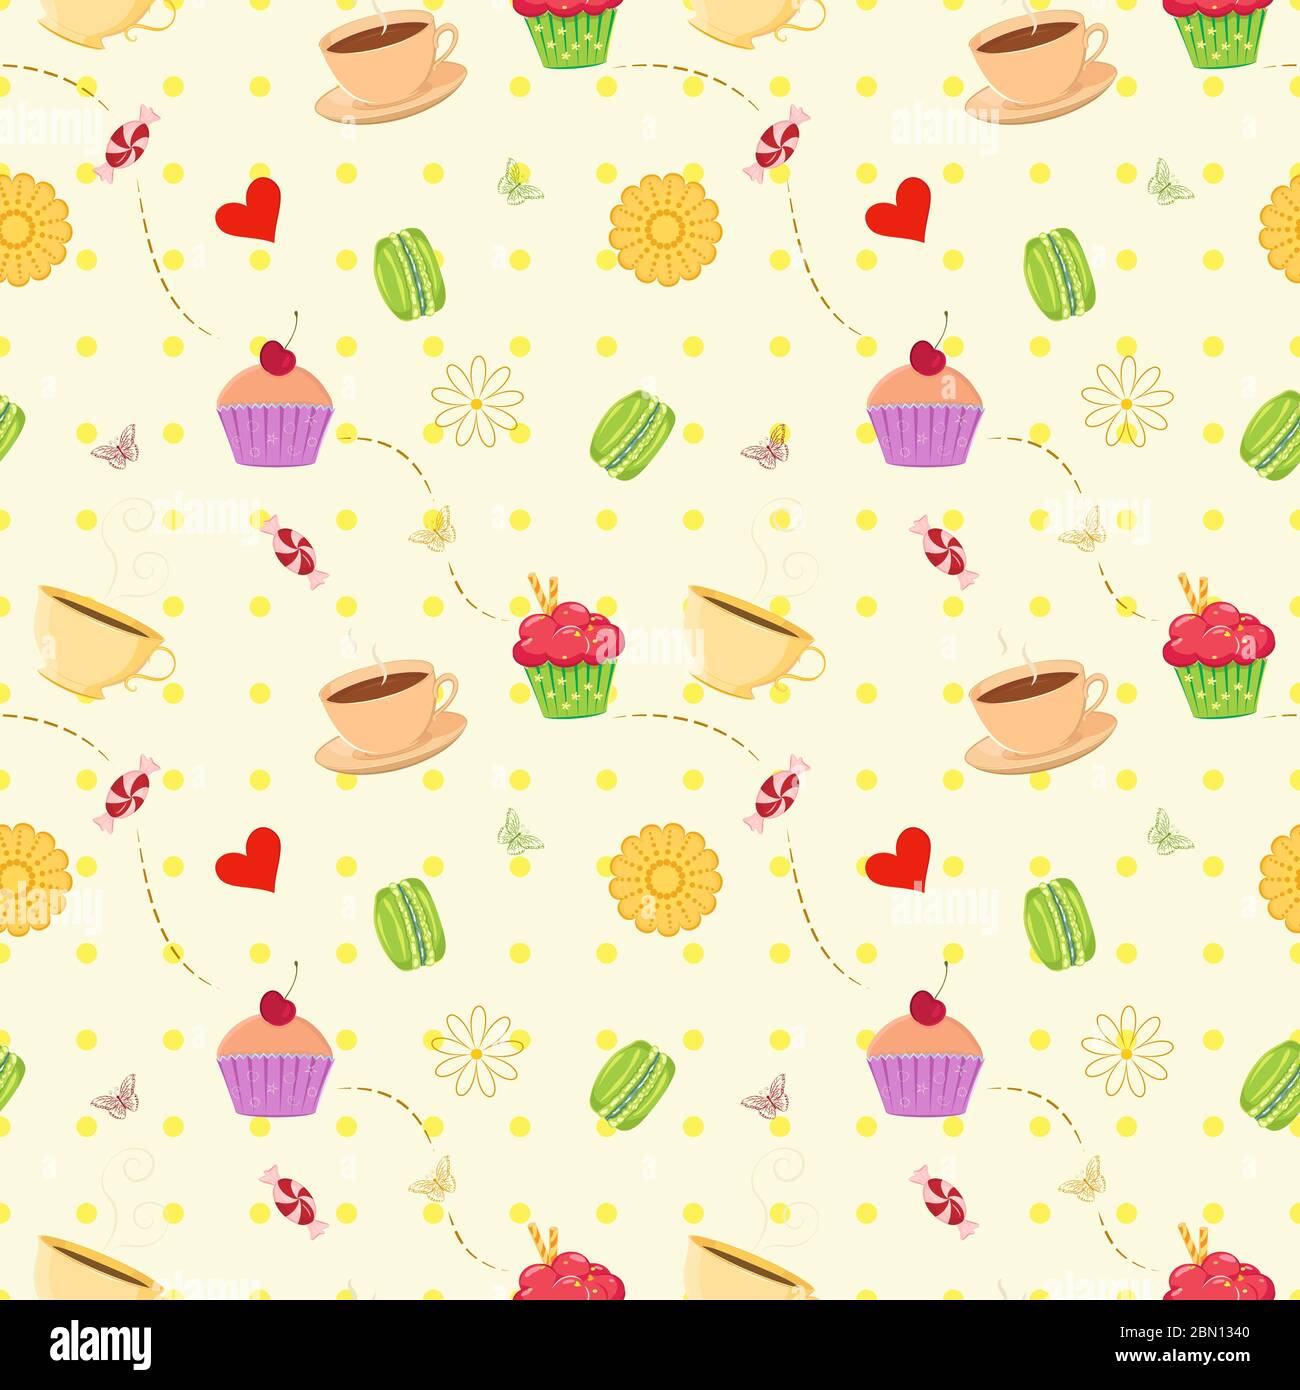 Colorful vector  seamless pattern with hand drawn dessert cupcakes, macaroons, candies and tea cups. Unique and elegant seamless food background with Stock Vector